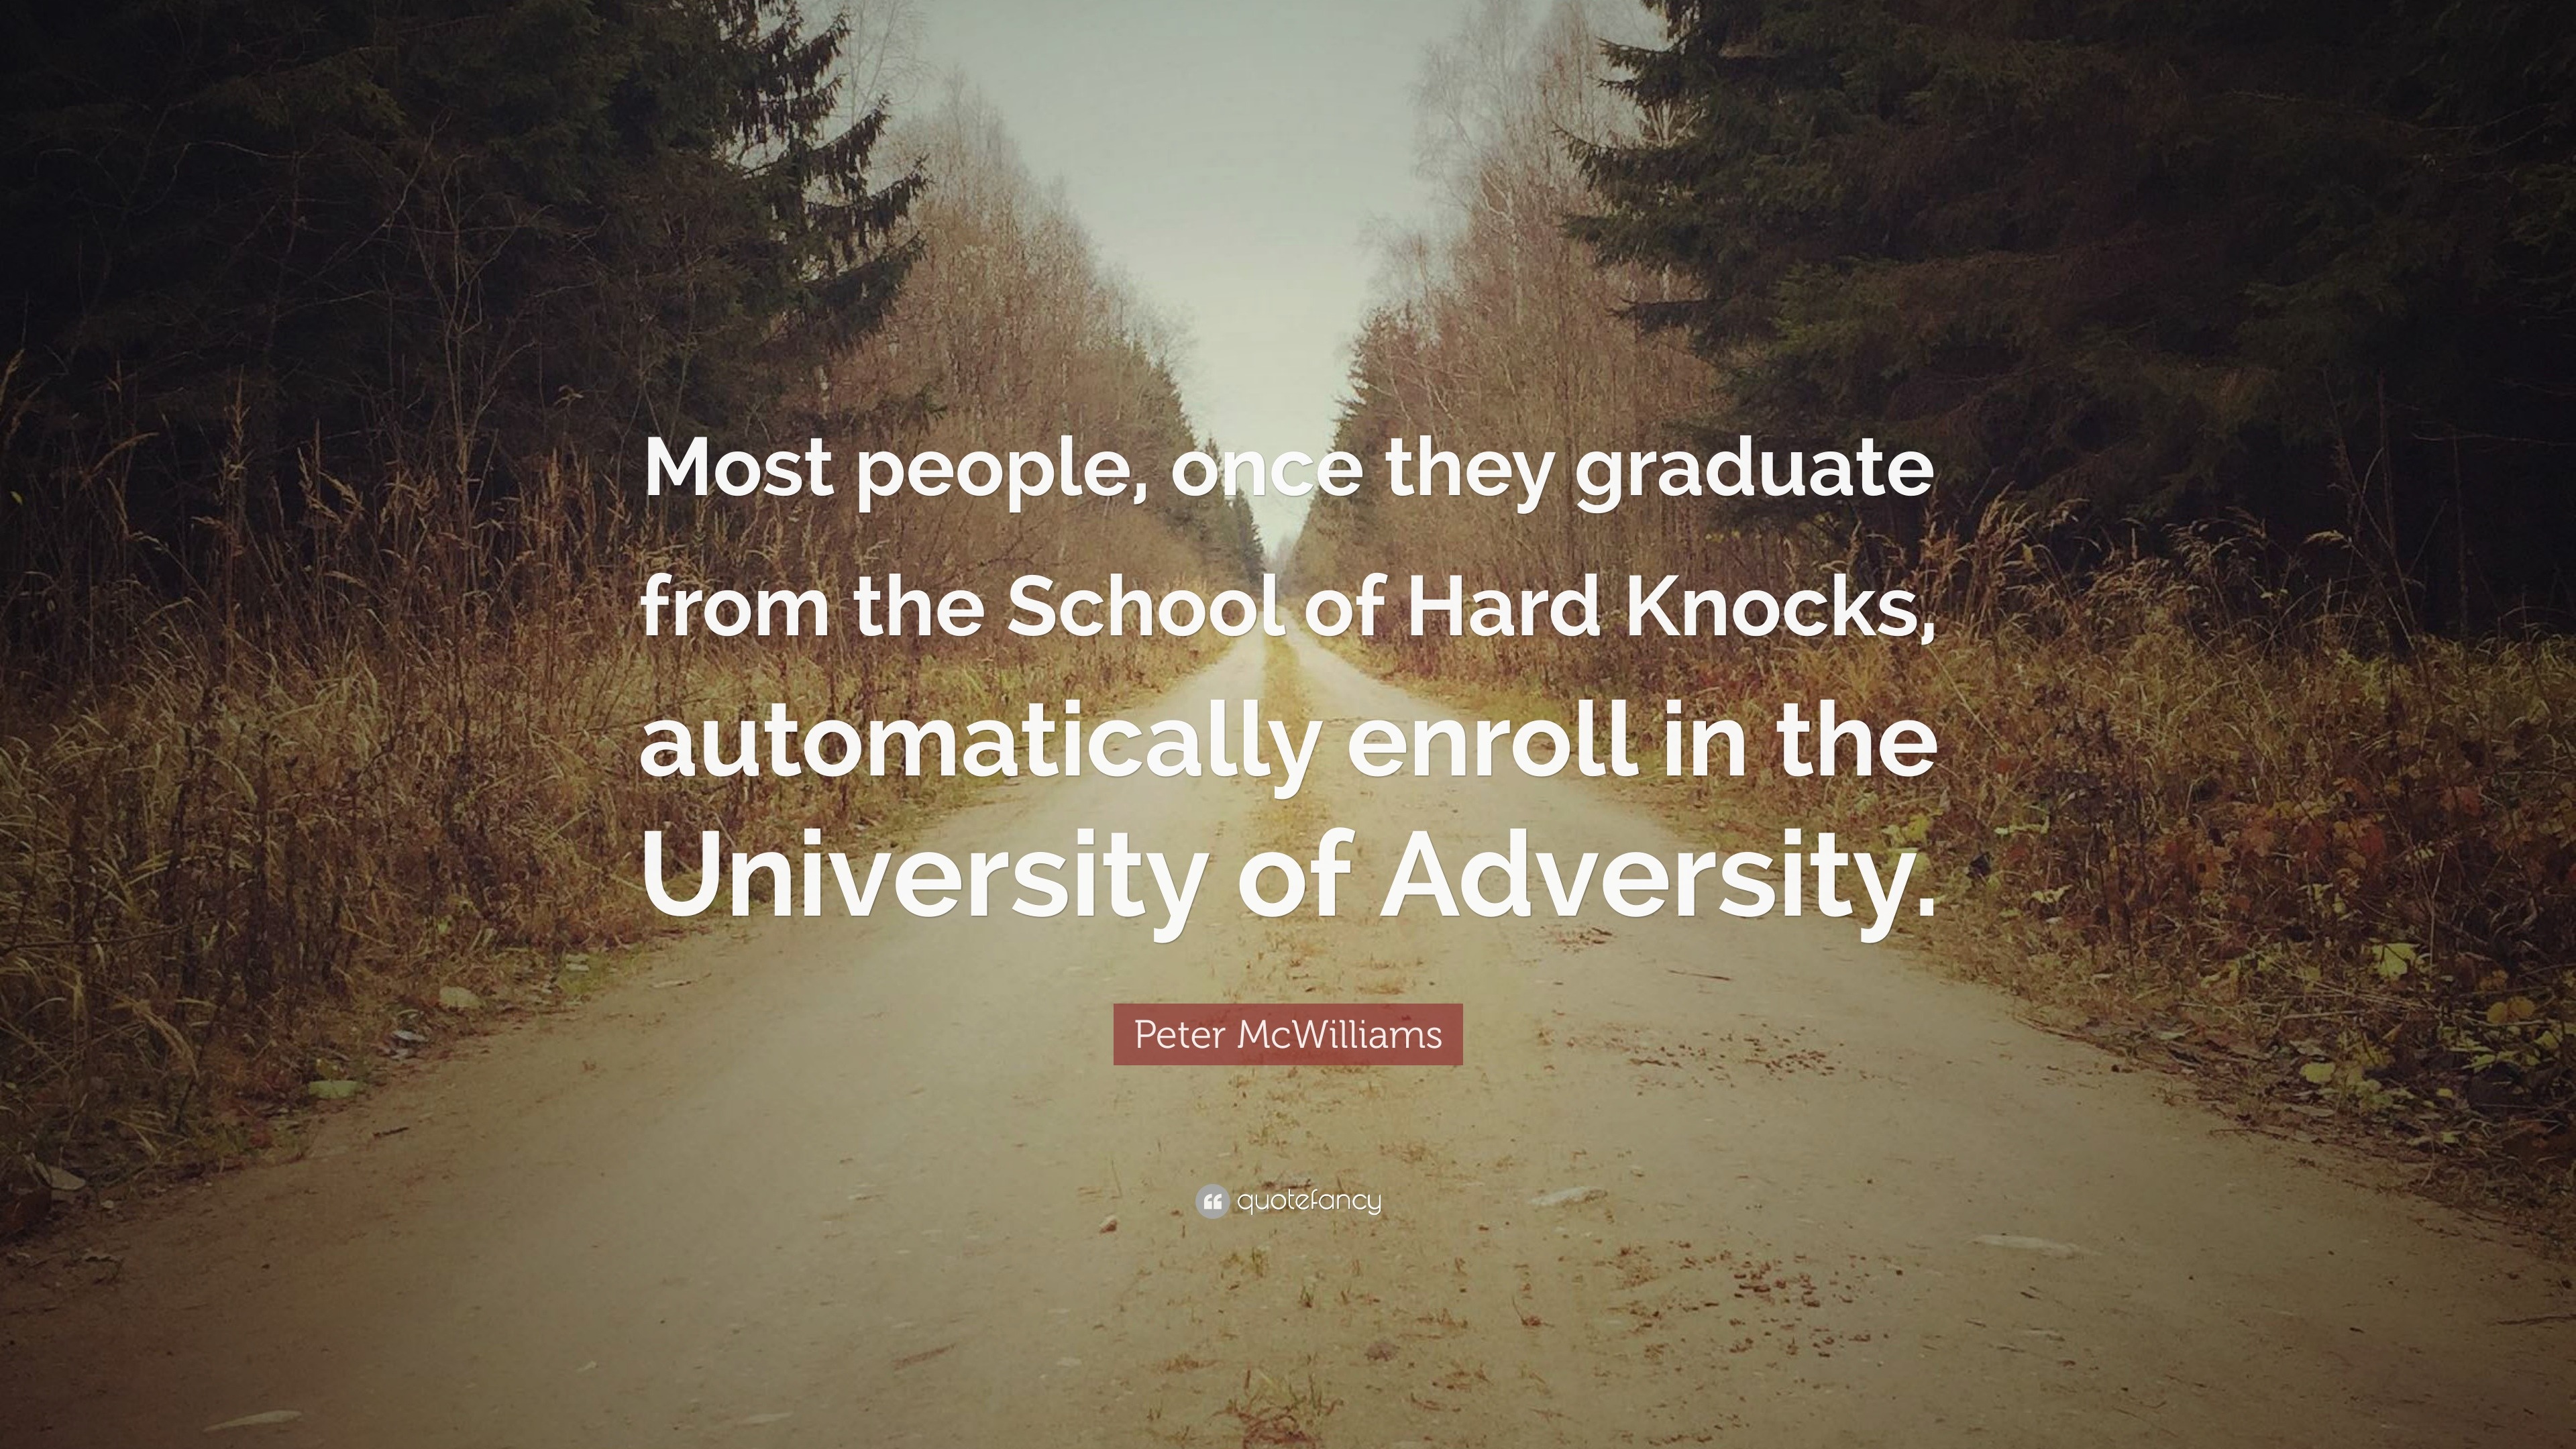 Peter McWilliams Quote: “Most people, once they graduate from the